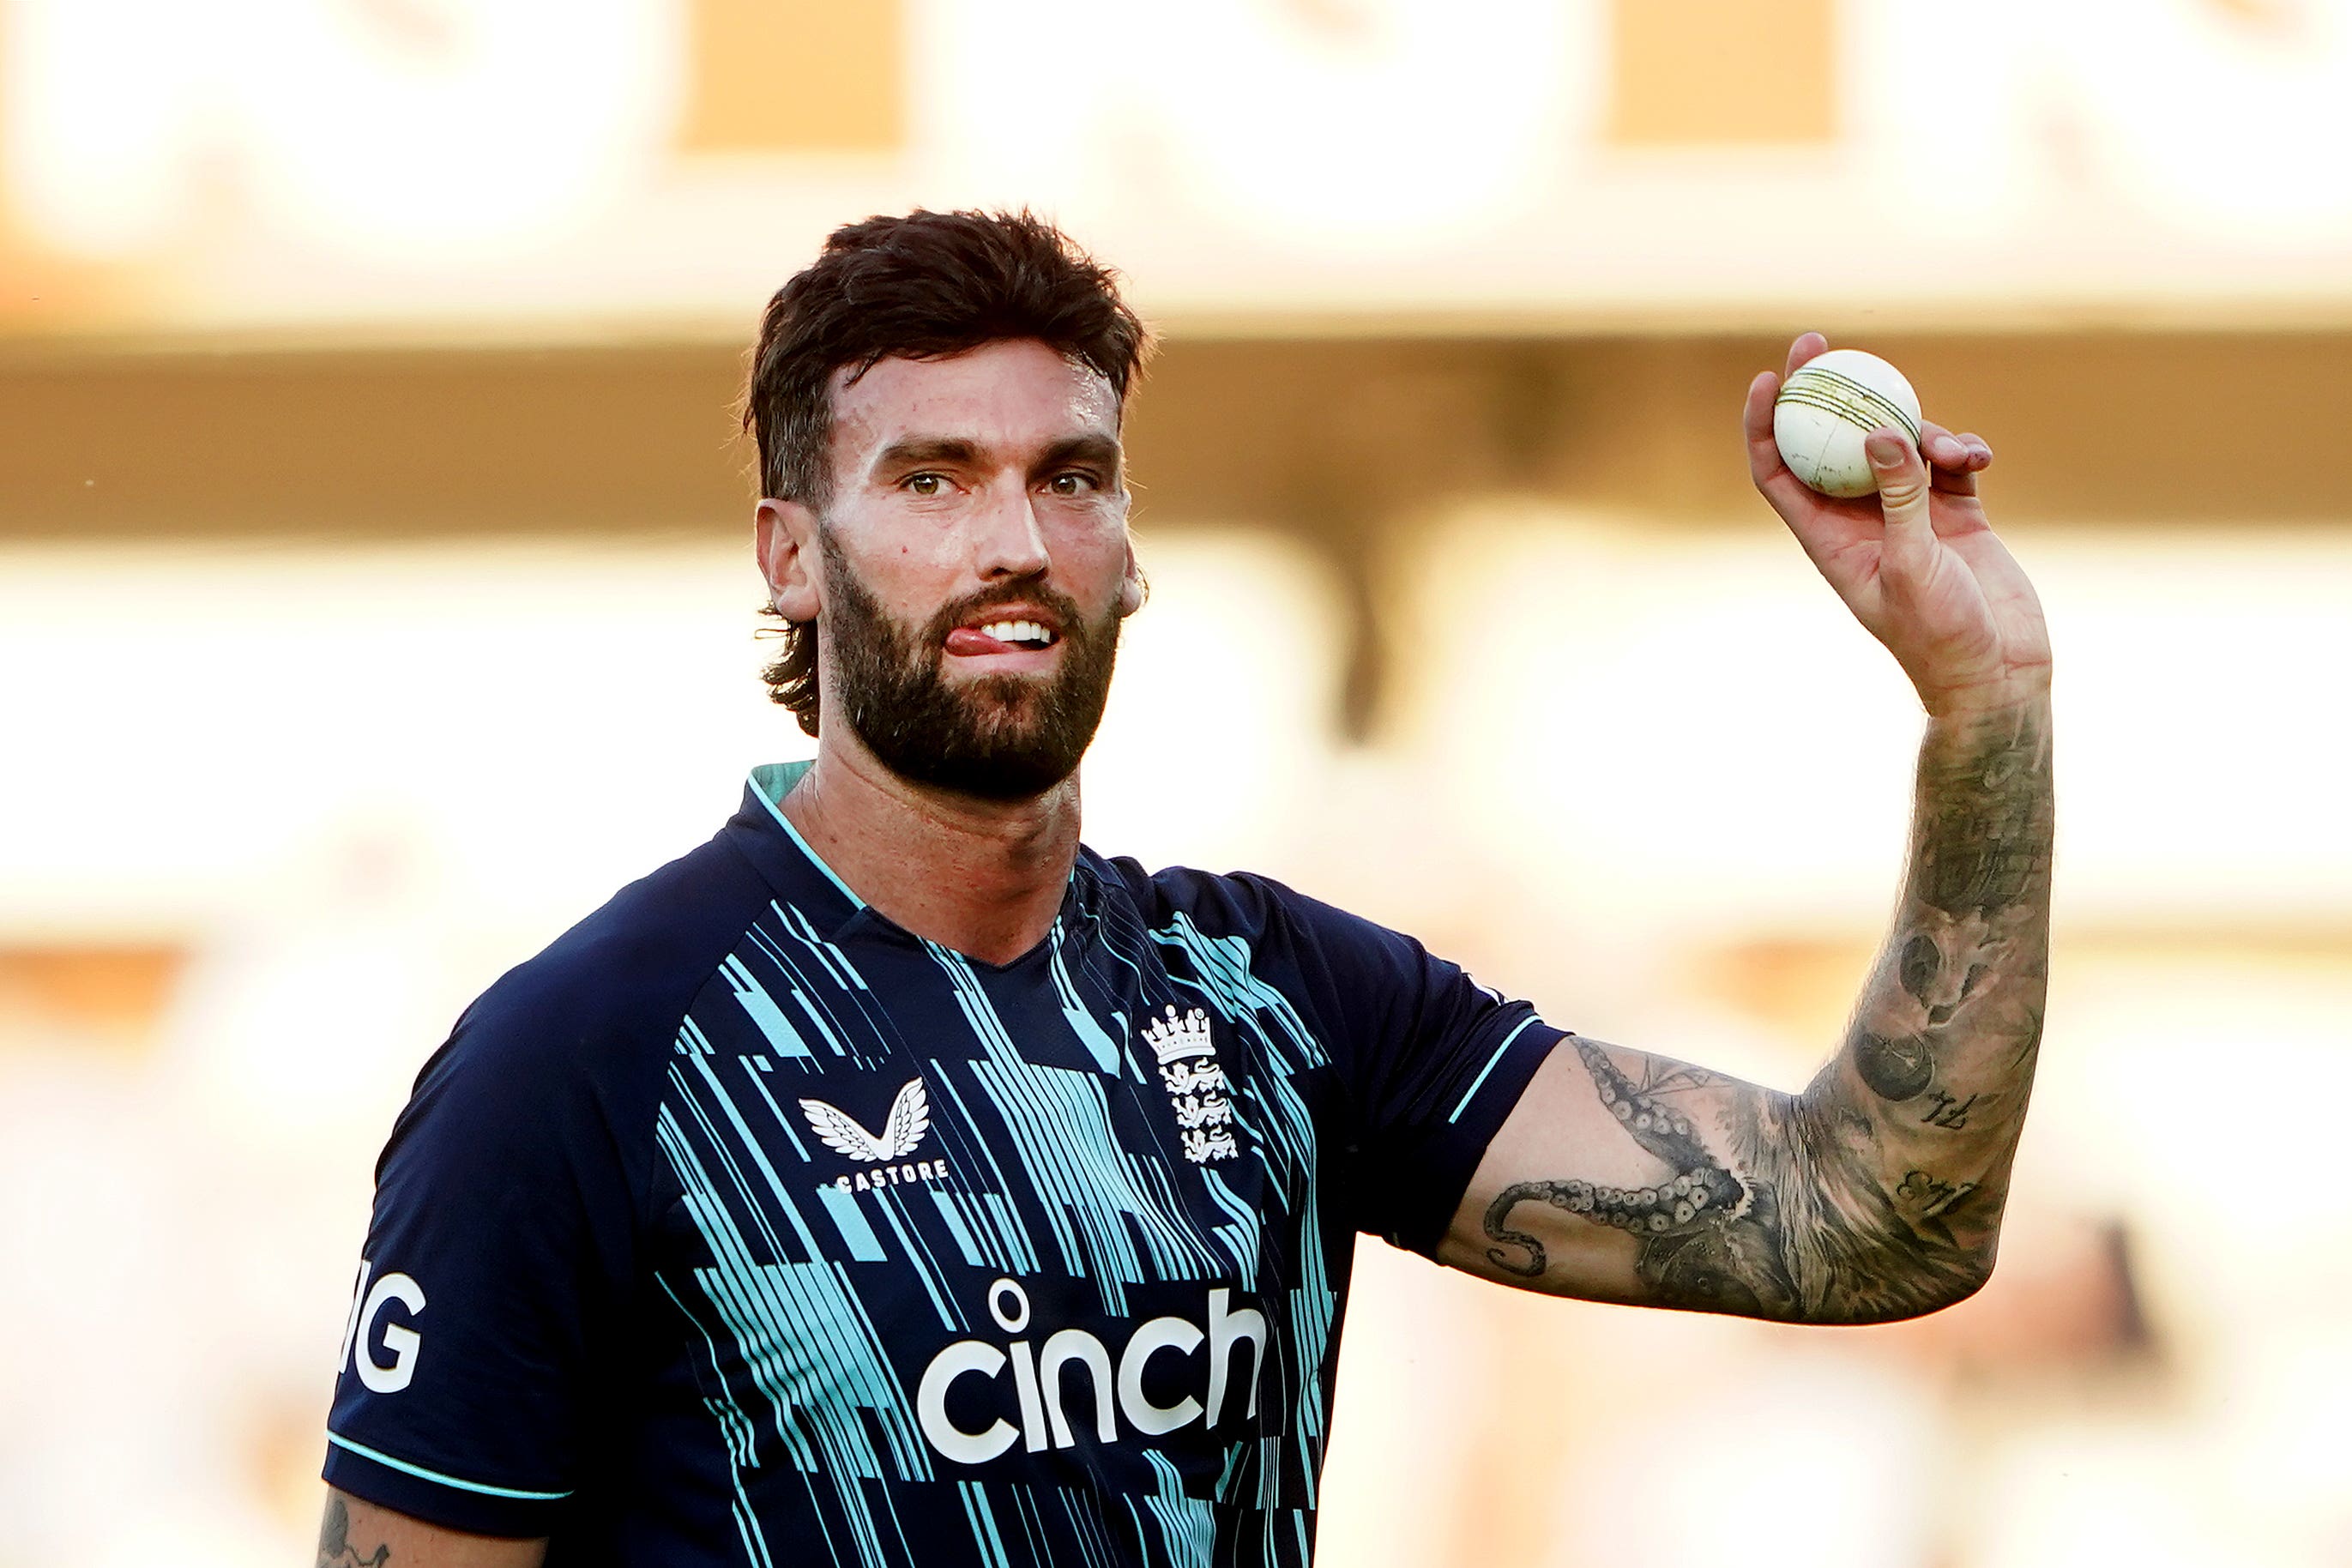 Reece Topley admitted feeling “alienated” from England’s T20 World Cup success after being ruled out through injury on the eve of the tournament (Zac Goodwin/PA)